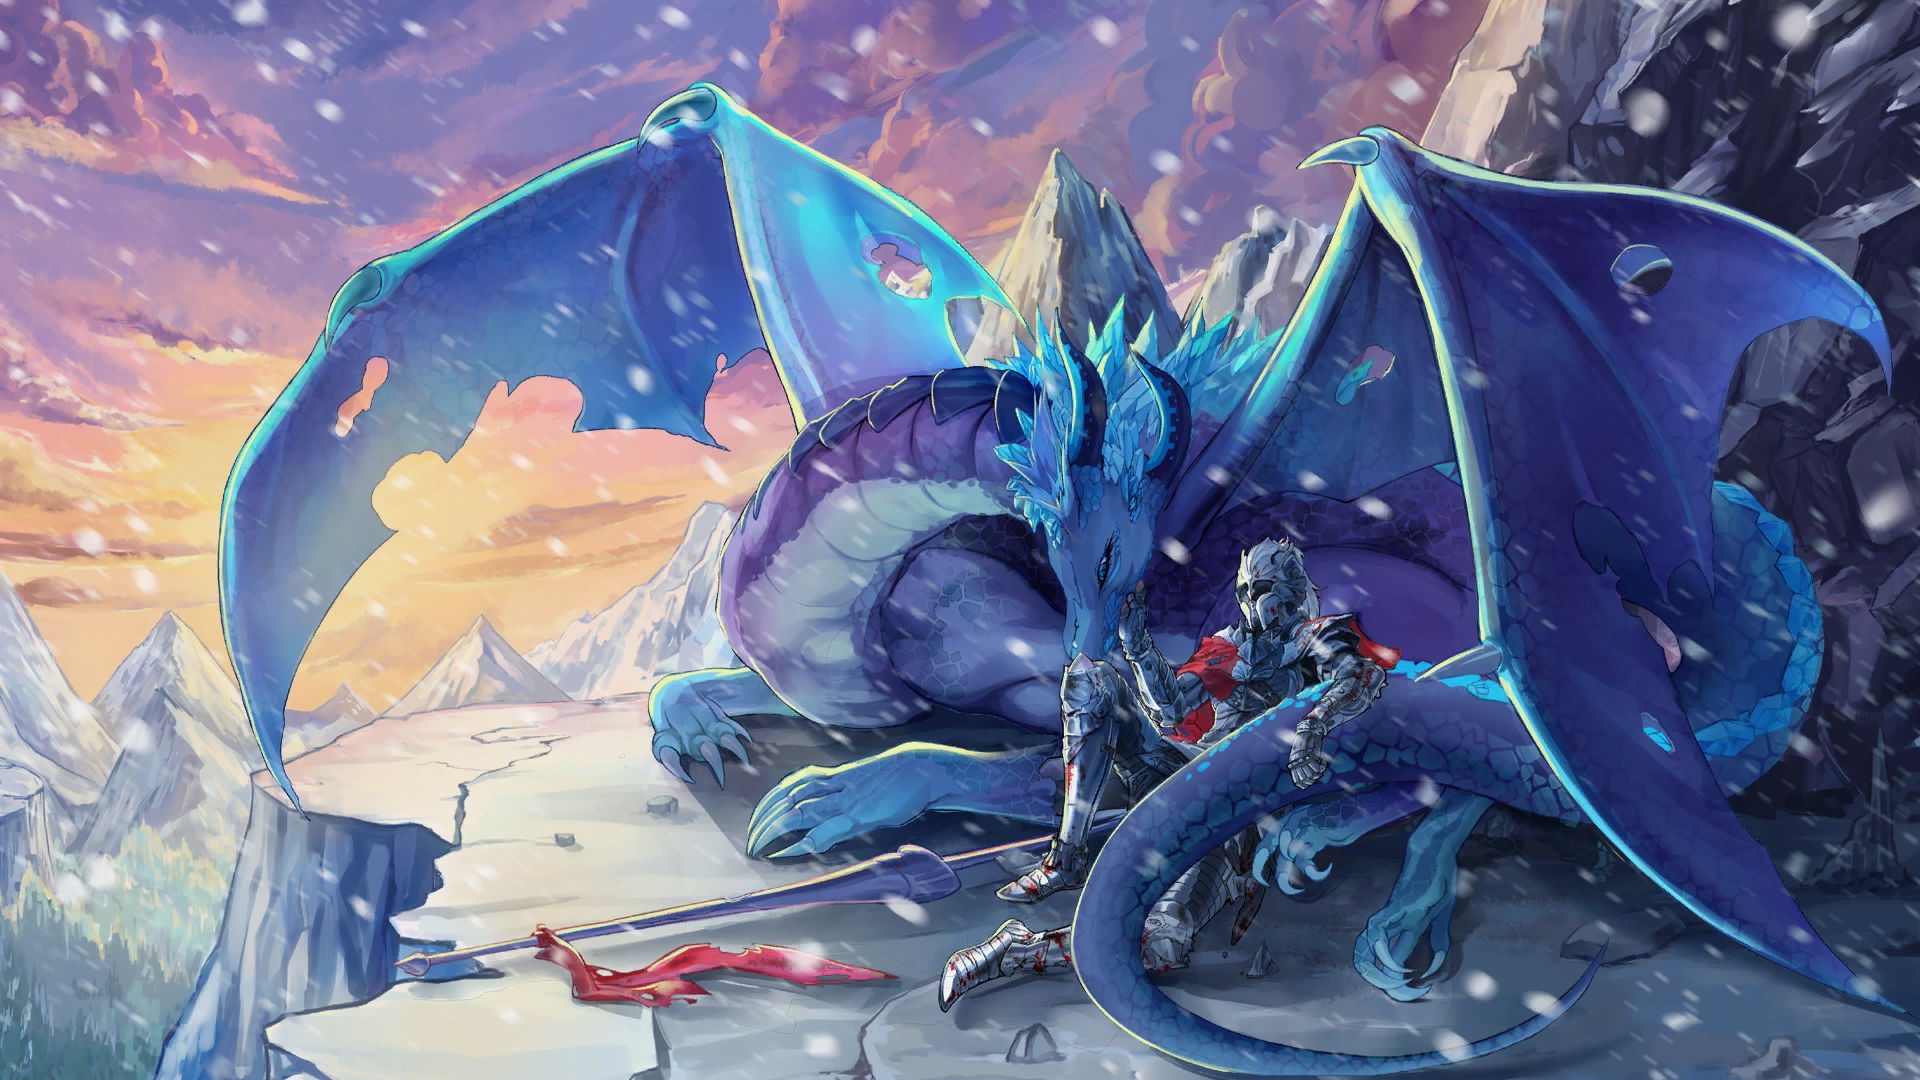 General 1920x1080 dragon mountains snowing sunset glow sunset sky clouds flag armor claws snow blood wings sitting digital art knight sunlight